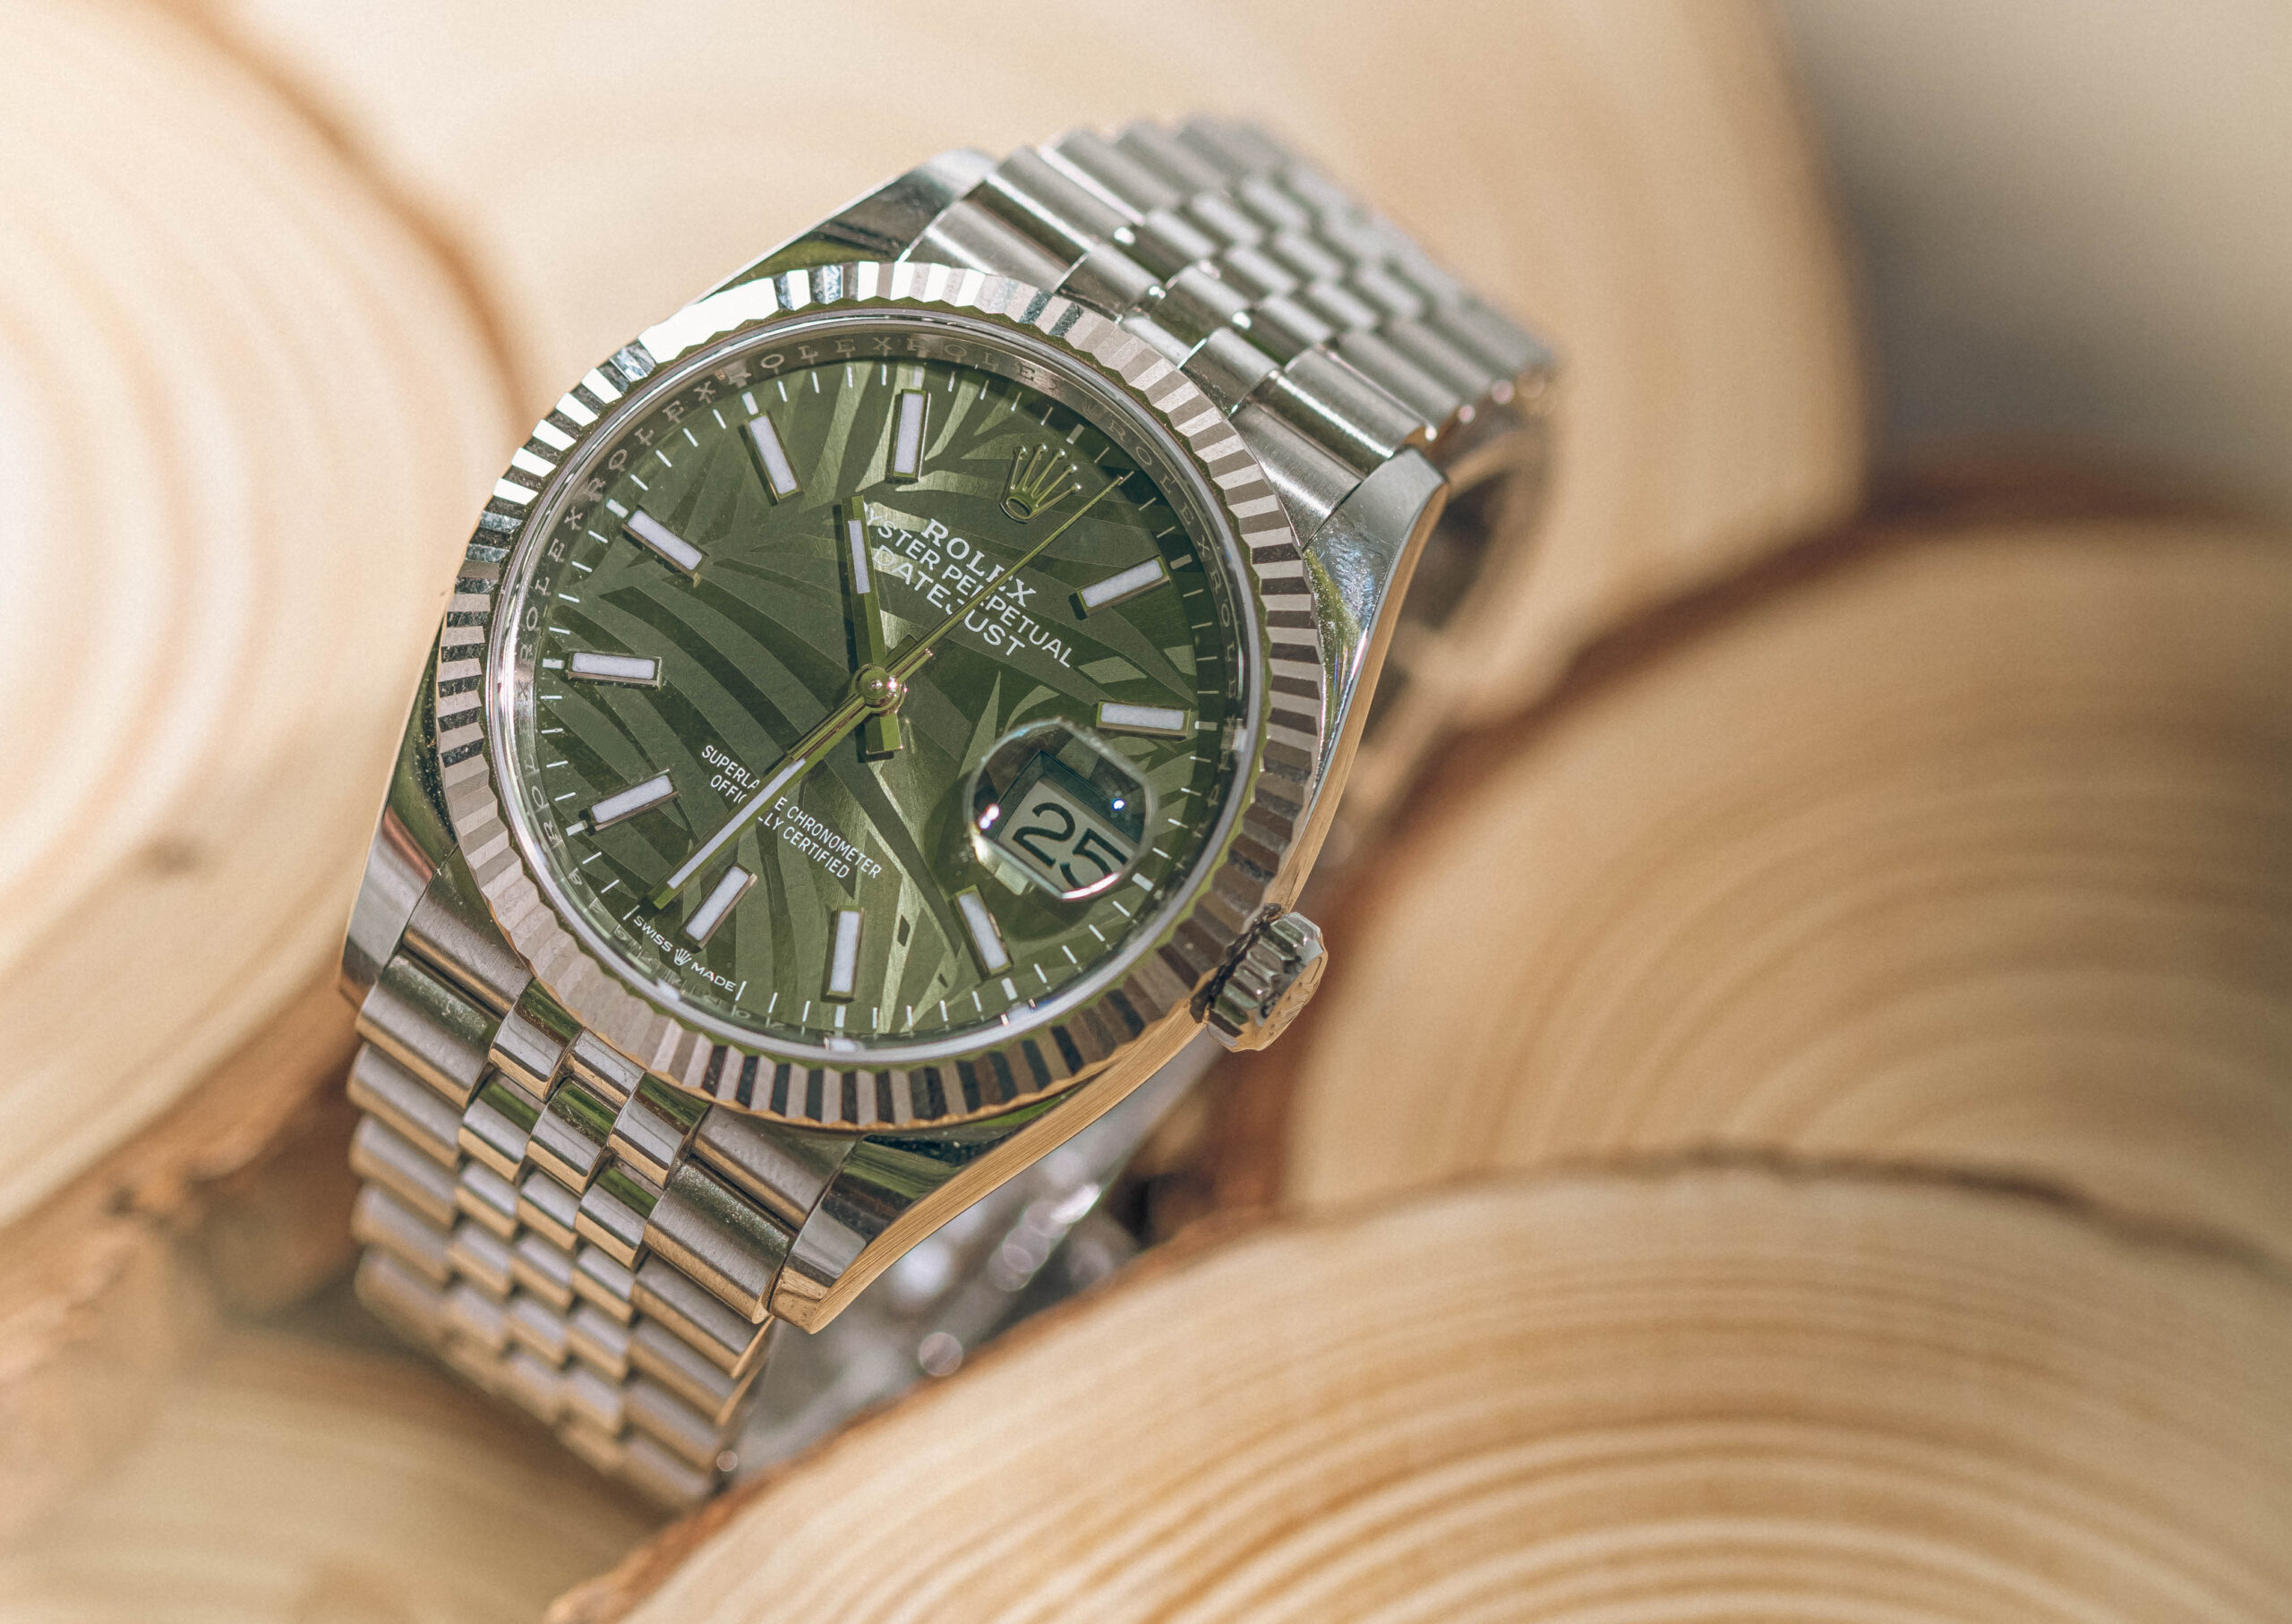 How to Tell if a Rolex Watch is Real or Fake: 11 Signs